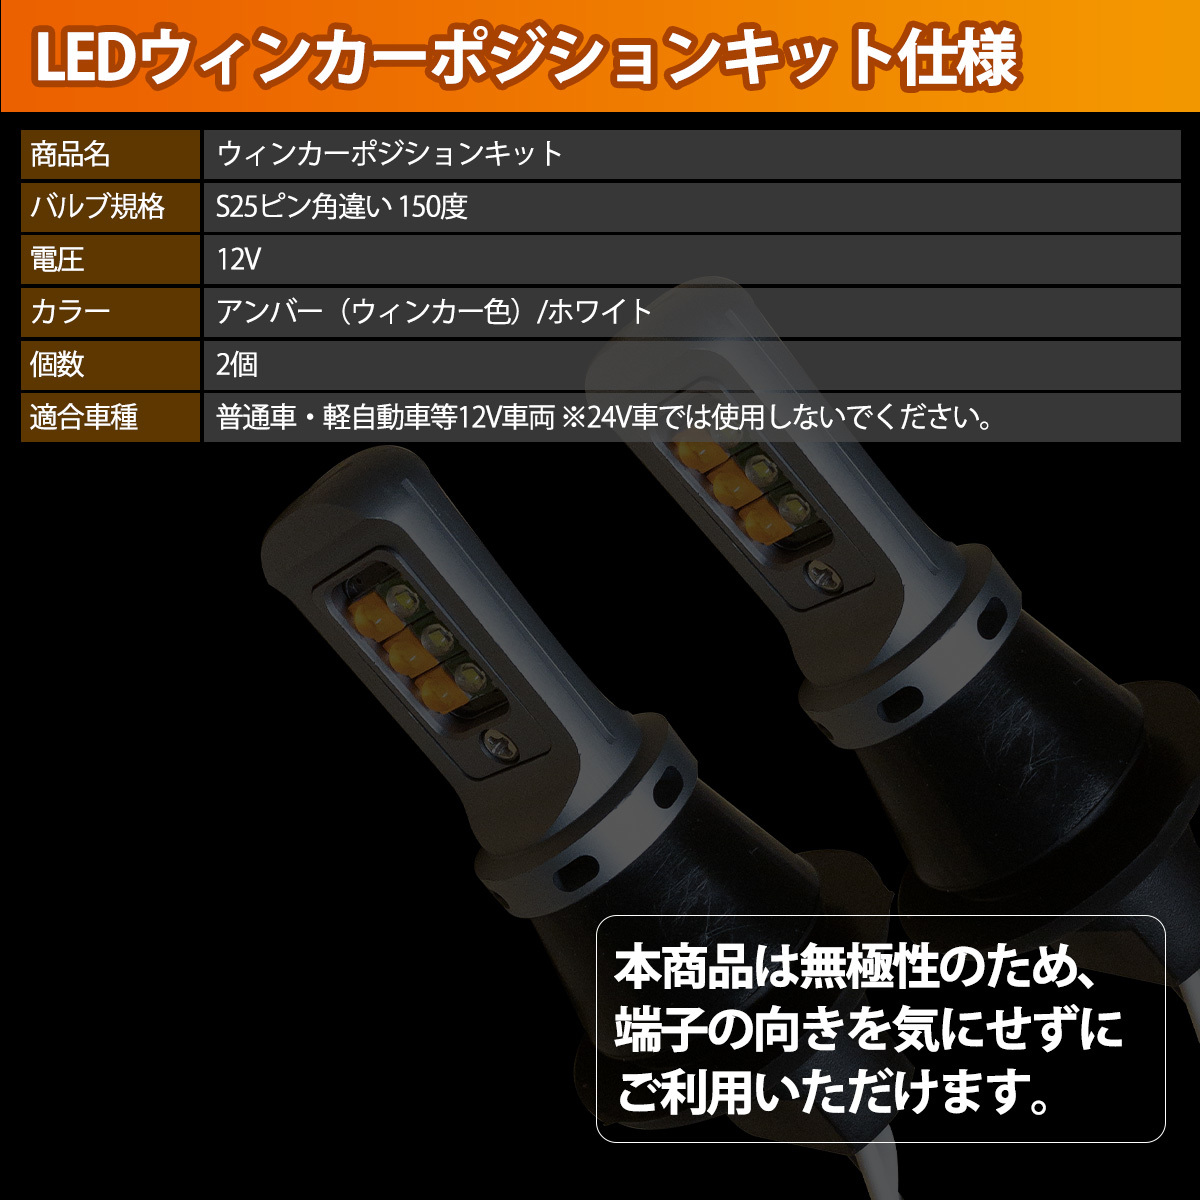 1】 CX-5 KE系 前期 S25 LED ウィンカー ポジション キット ハイフラ防止 抵抗器 方向指示器